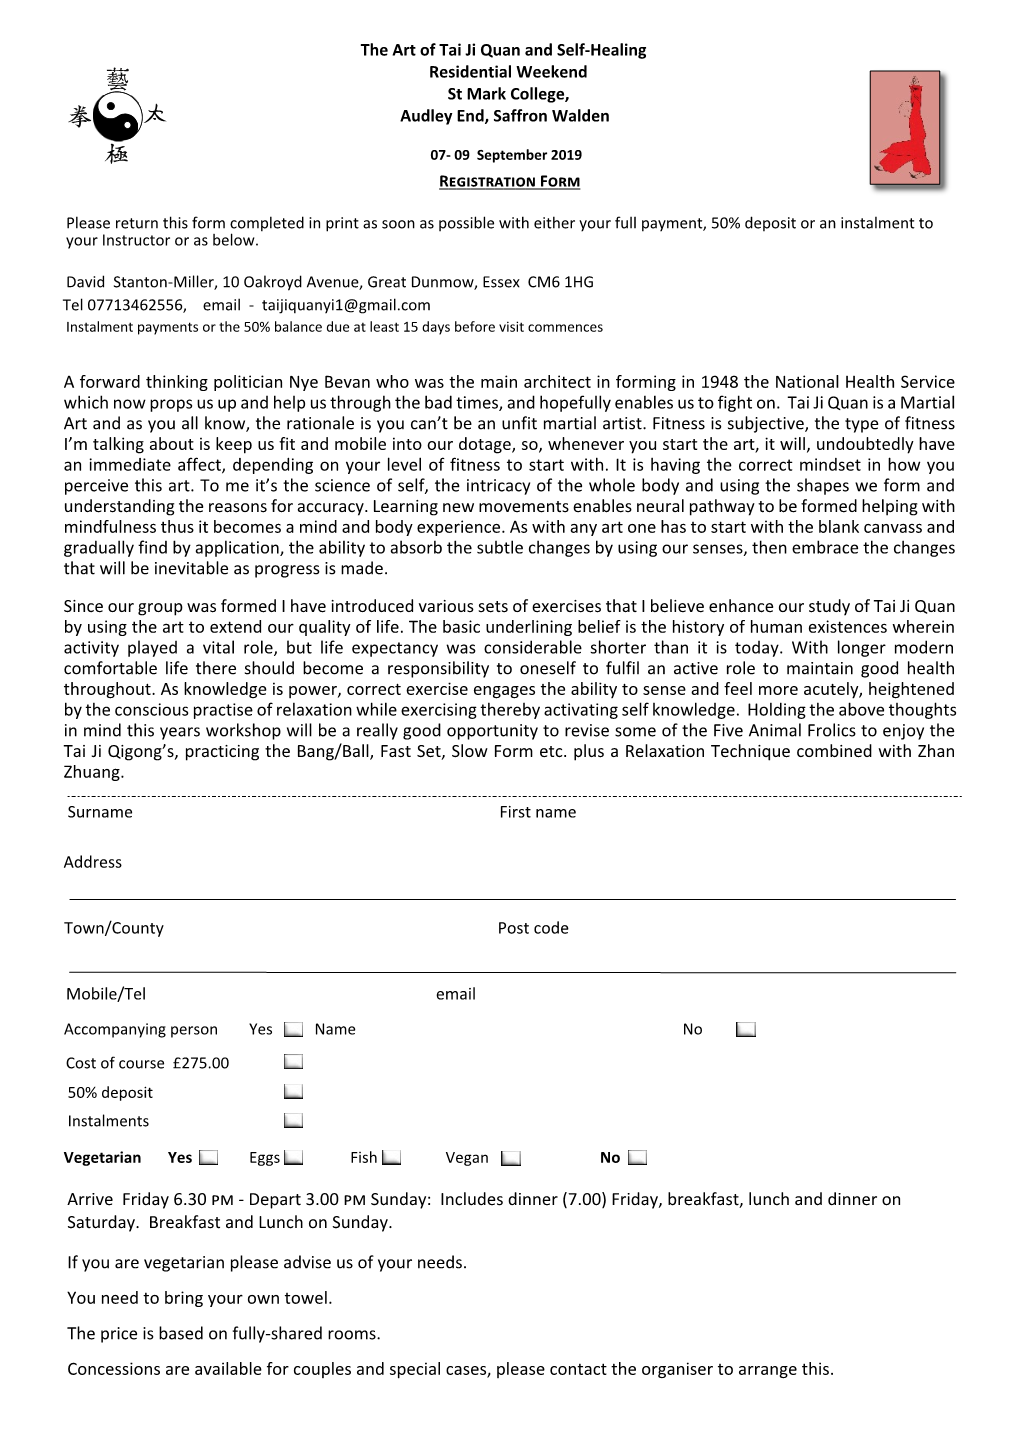 Residential Application Form 2019